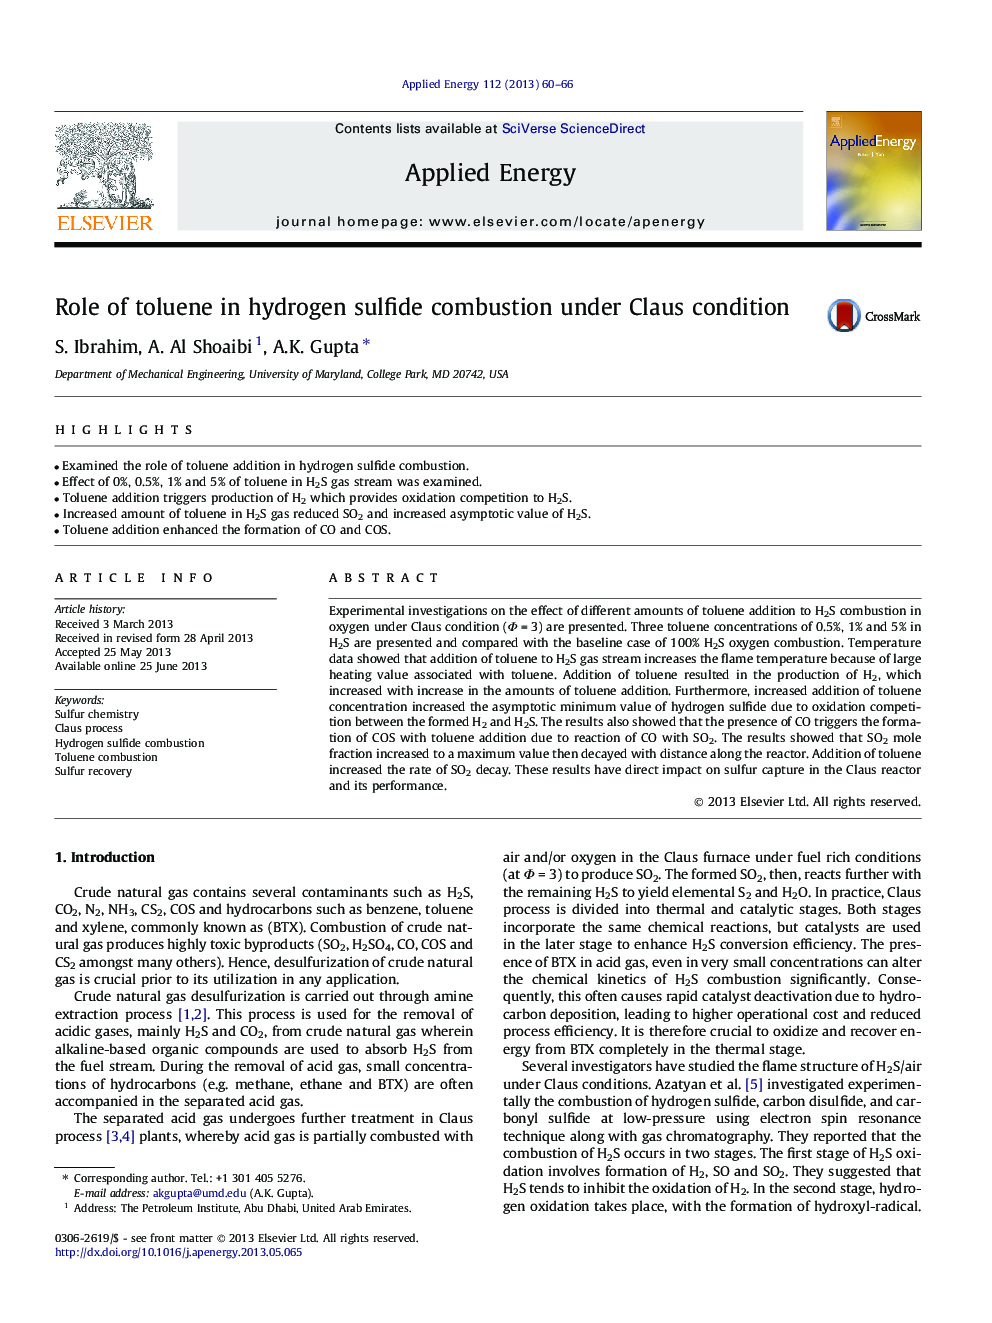 Role of toluene in hydrogen sulfide combustion under Claus condition